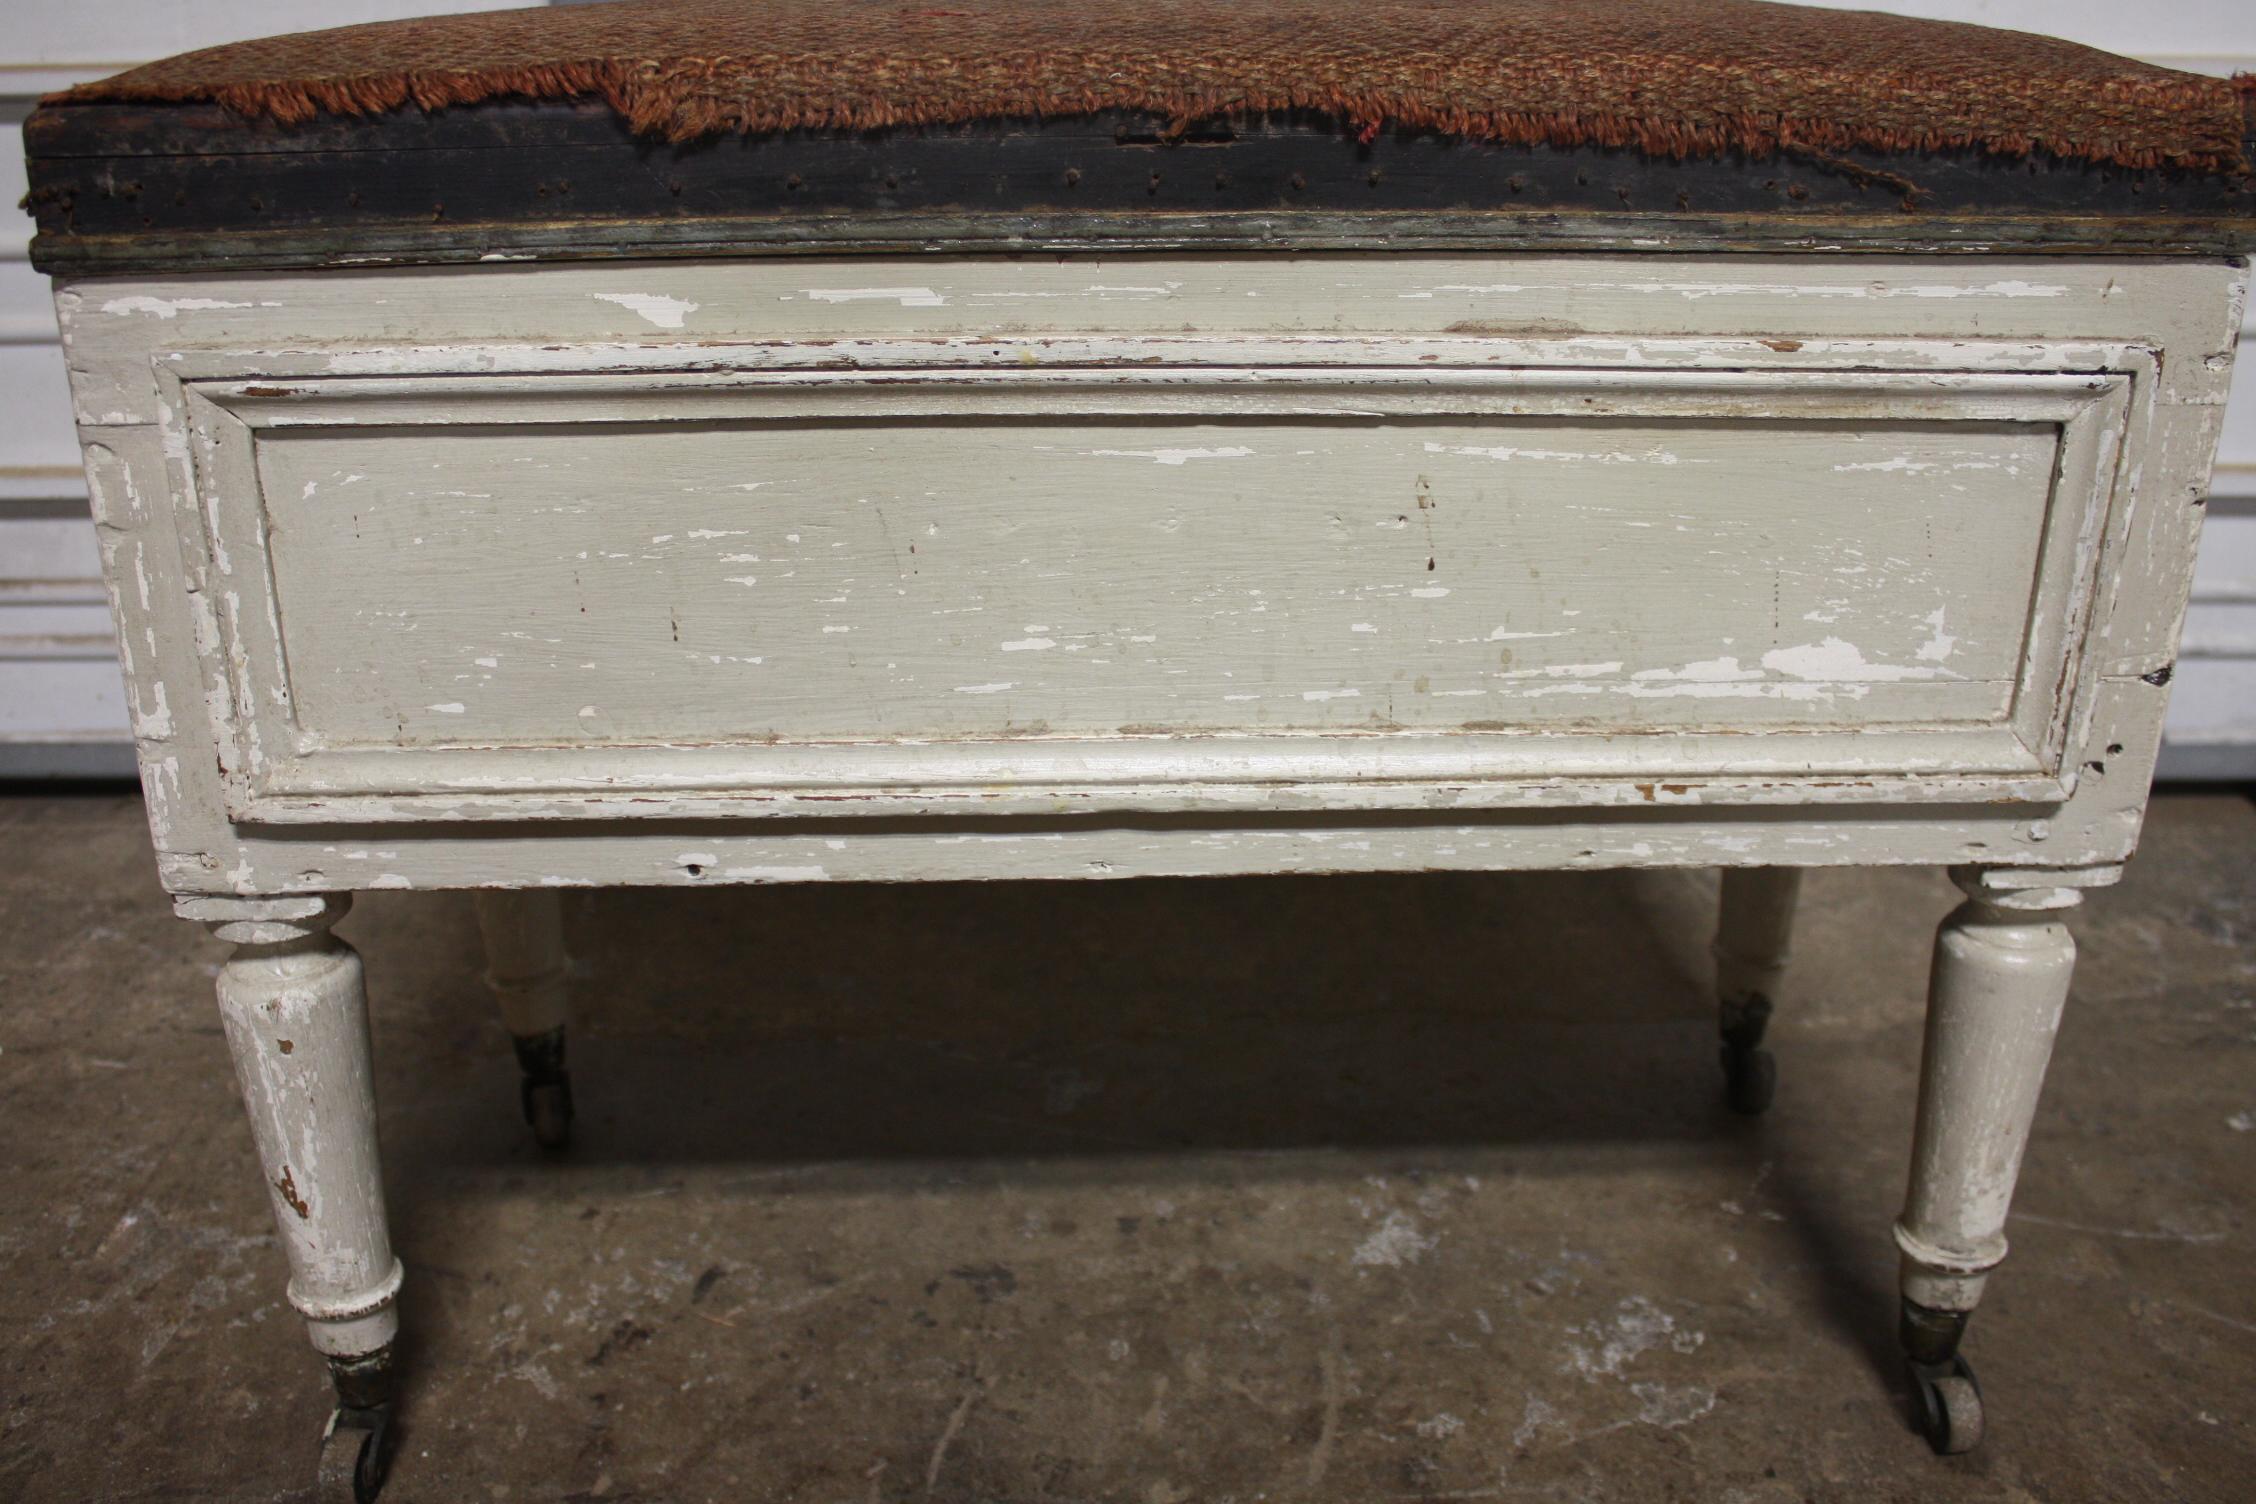 French, 19th Century, Stool or Small Bench In Good Condition For Sale In Stockbridge, GA